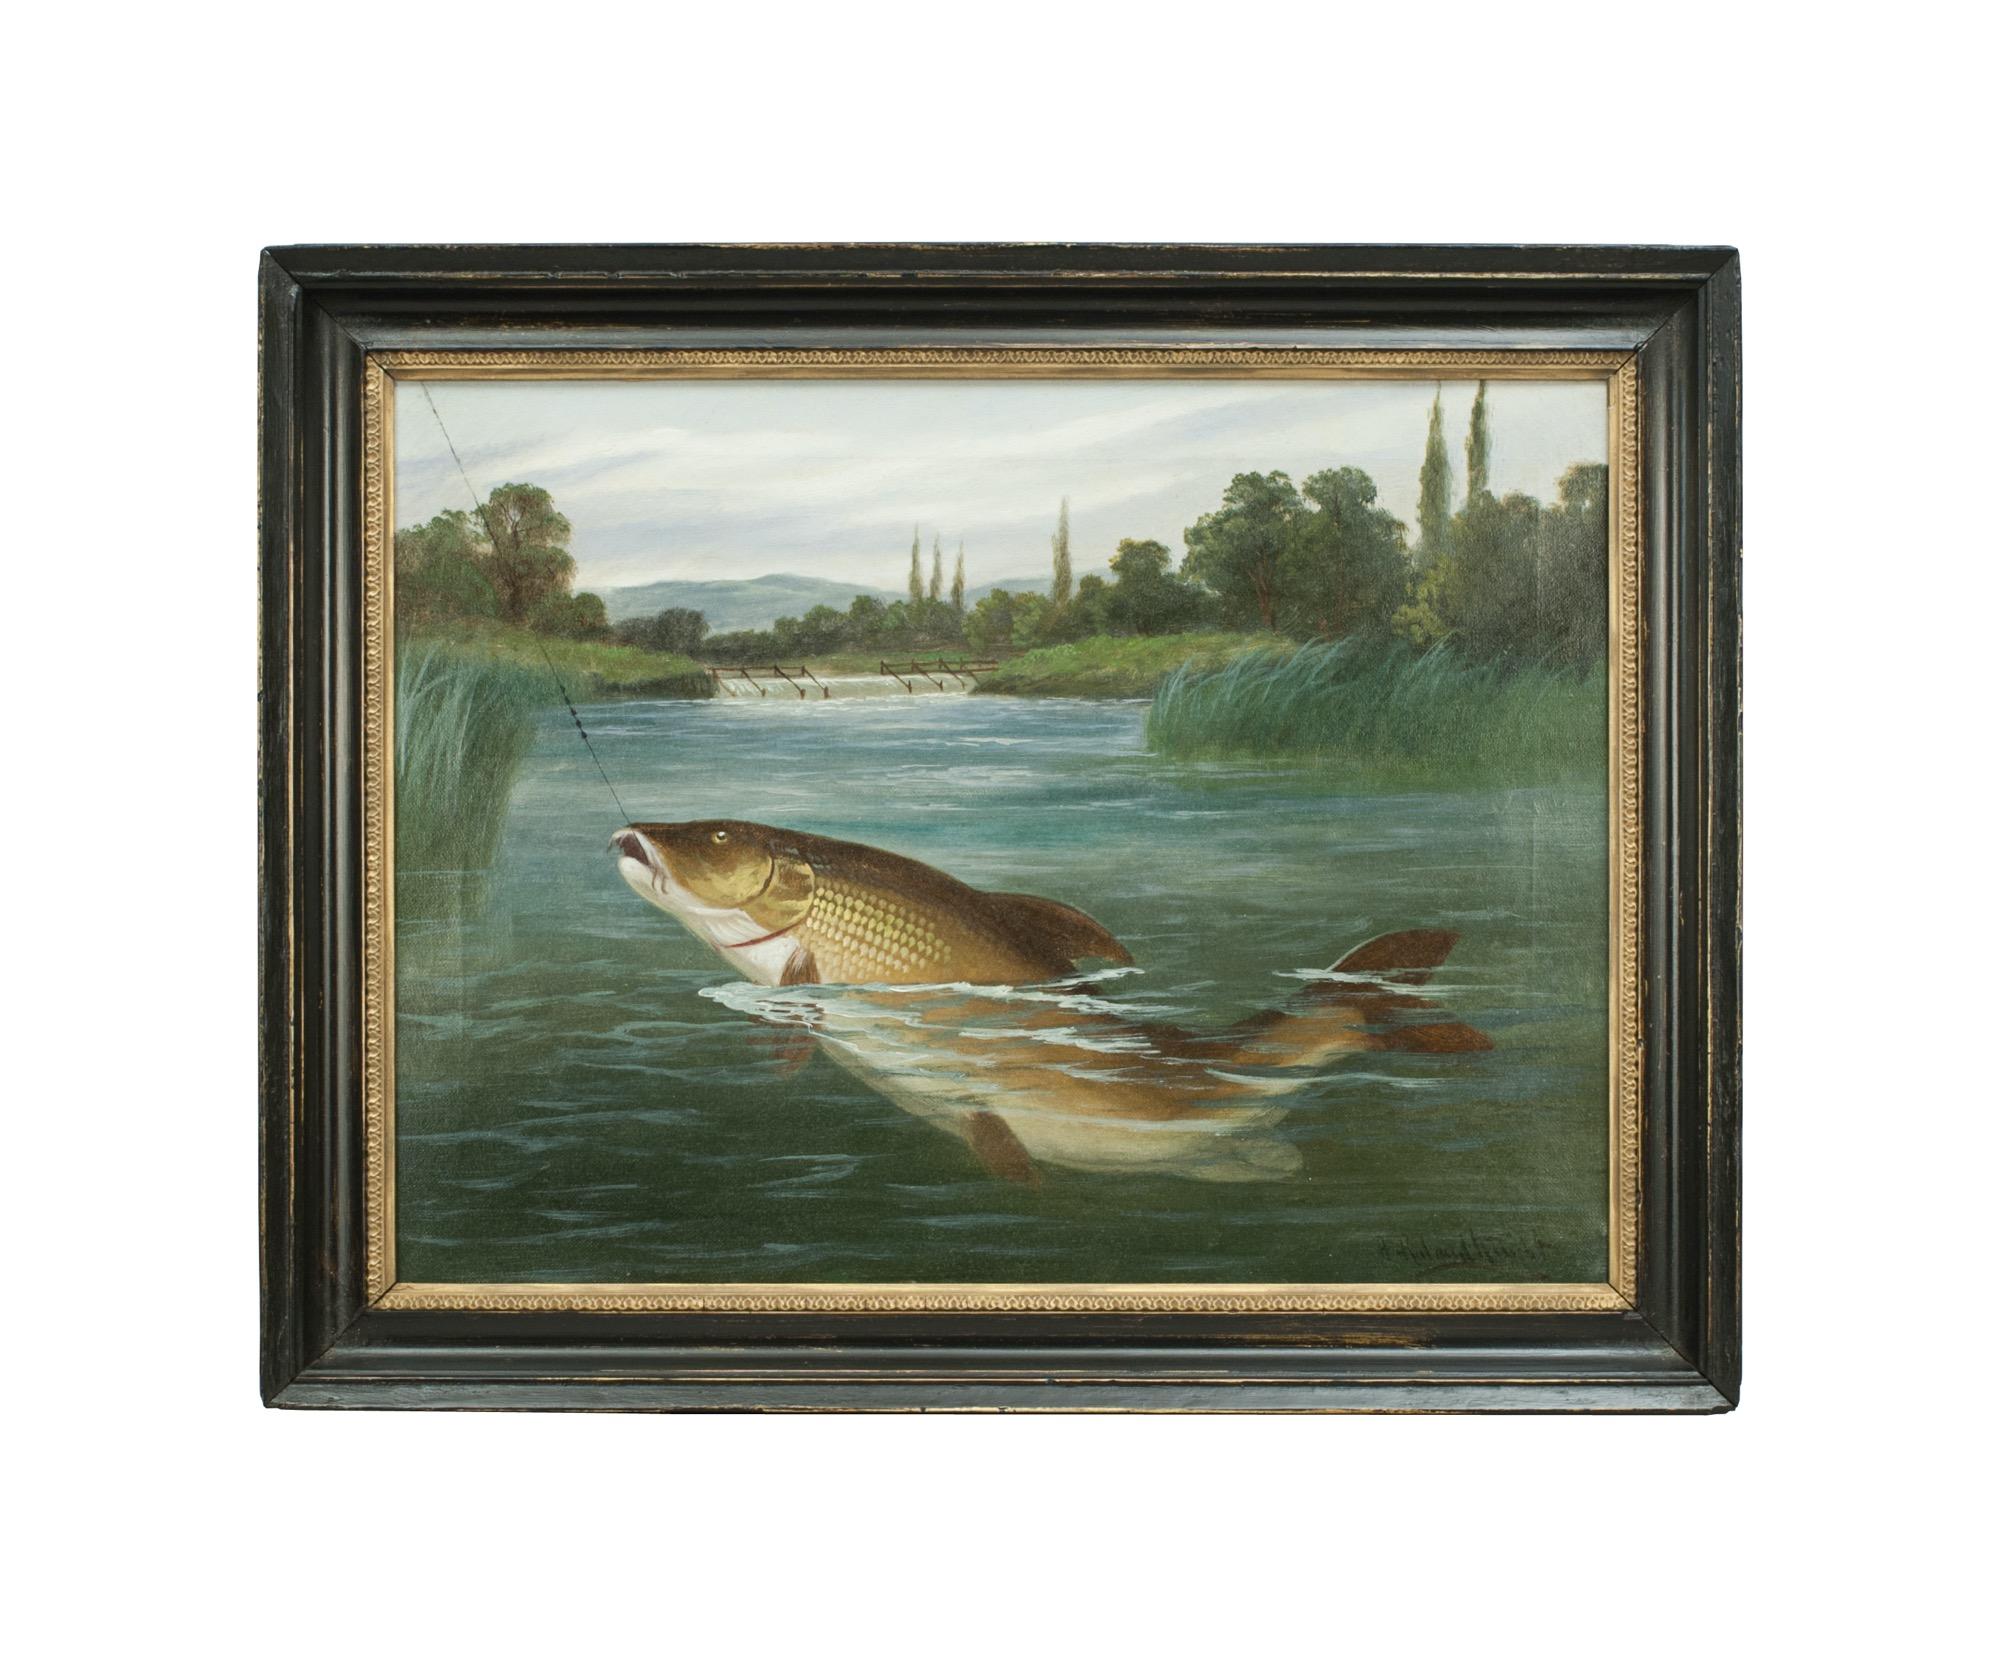 Roland knight fish oil paintings, fishing on the thames.
A Fine pair of original Victorian oil on canvas fish paintings by A. Roland Knight (1879-1921), renowned angling artist. The two studies are 'A Fallen Monarch' and 'Thames Barbel Fishing',